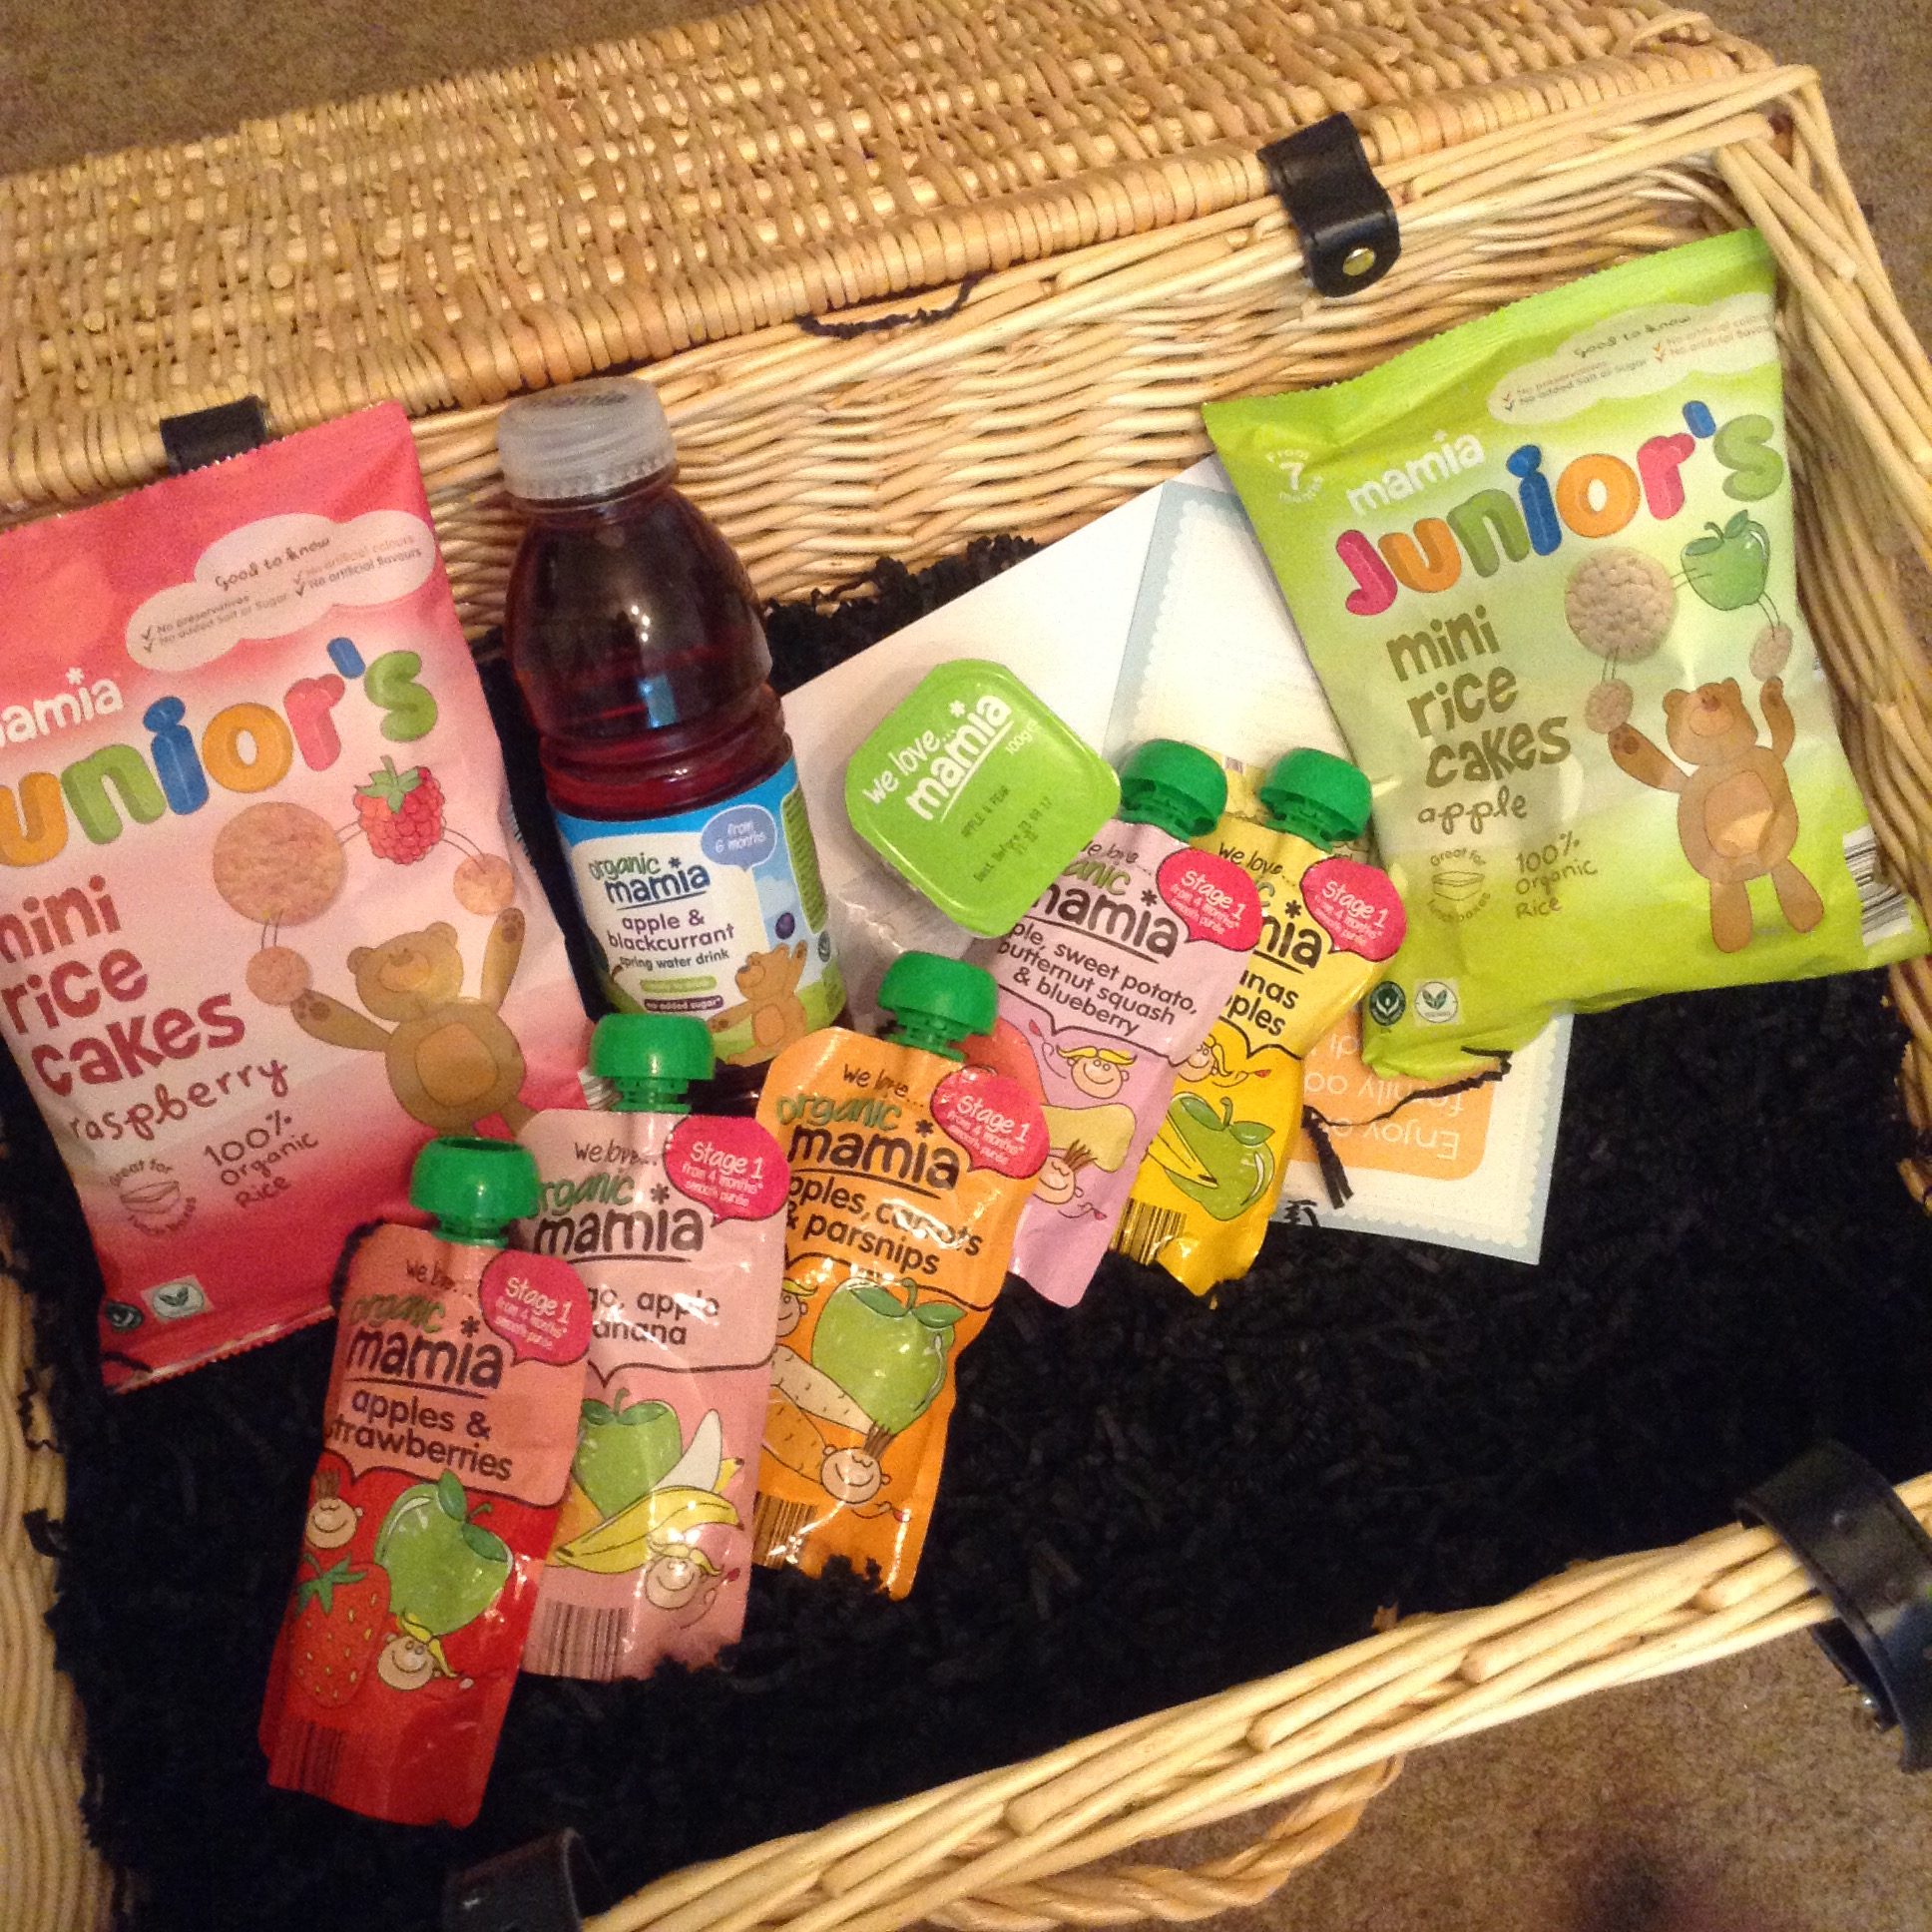 #MamiaDaysOut hamper, a large wicker basket filled with Mamia blackcurrant spring water, fruit puree pouches and rice cakes